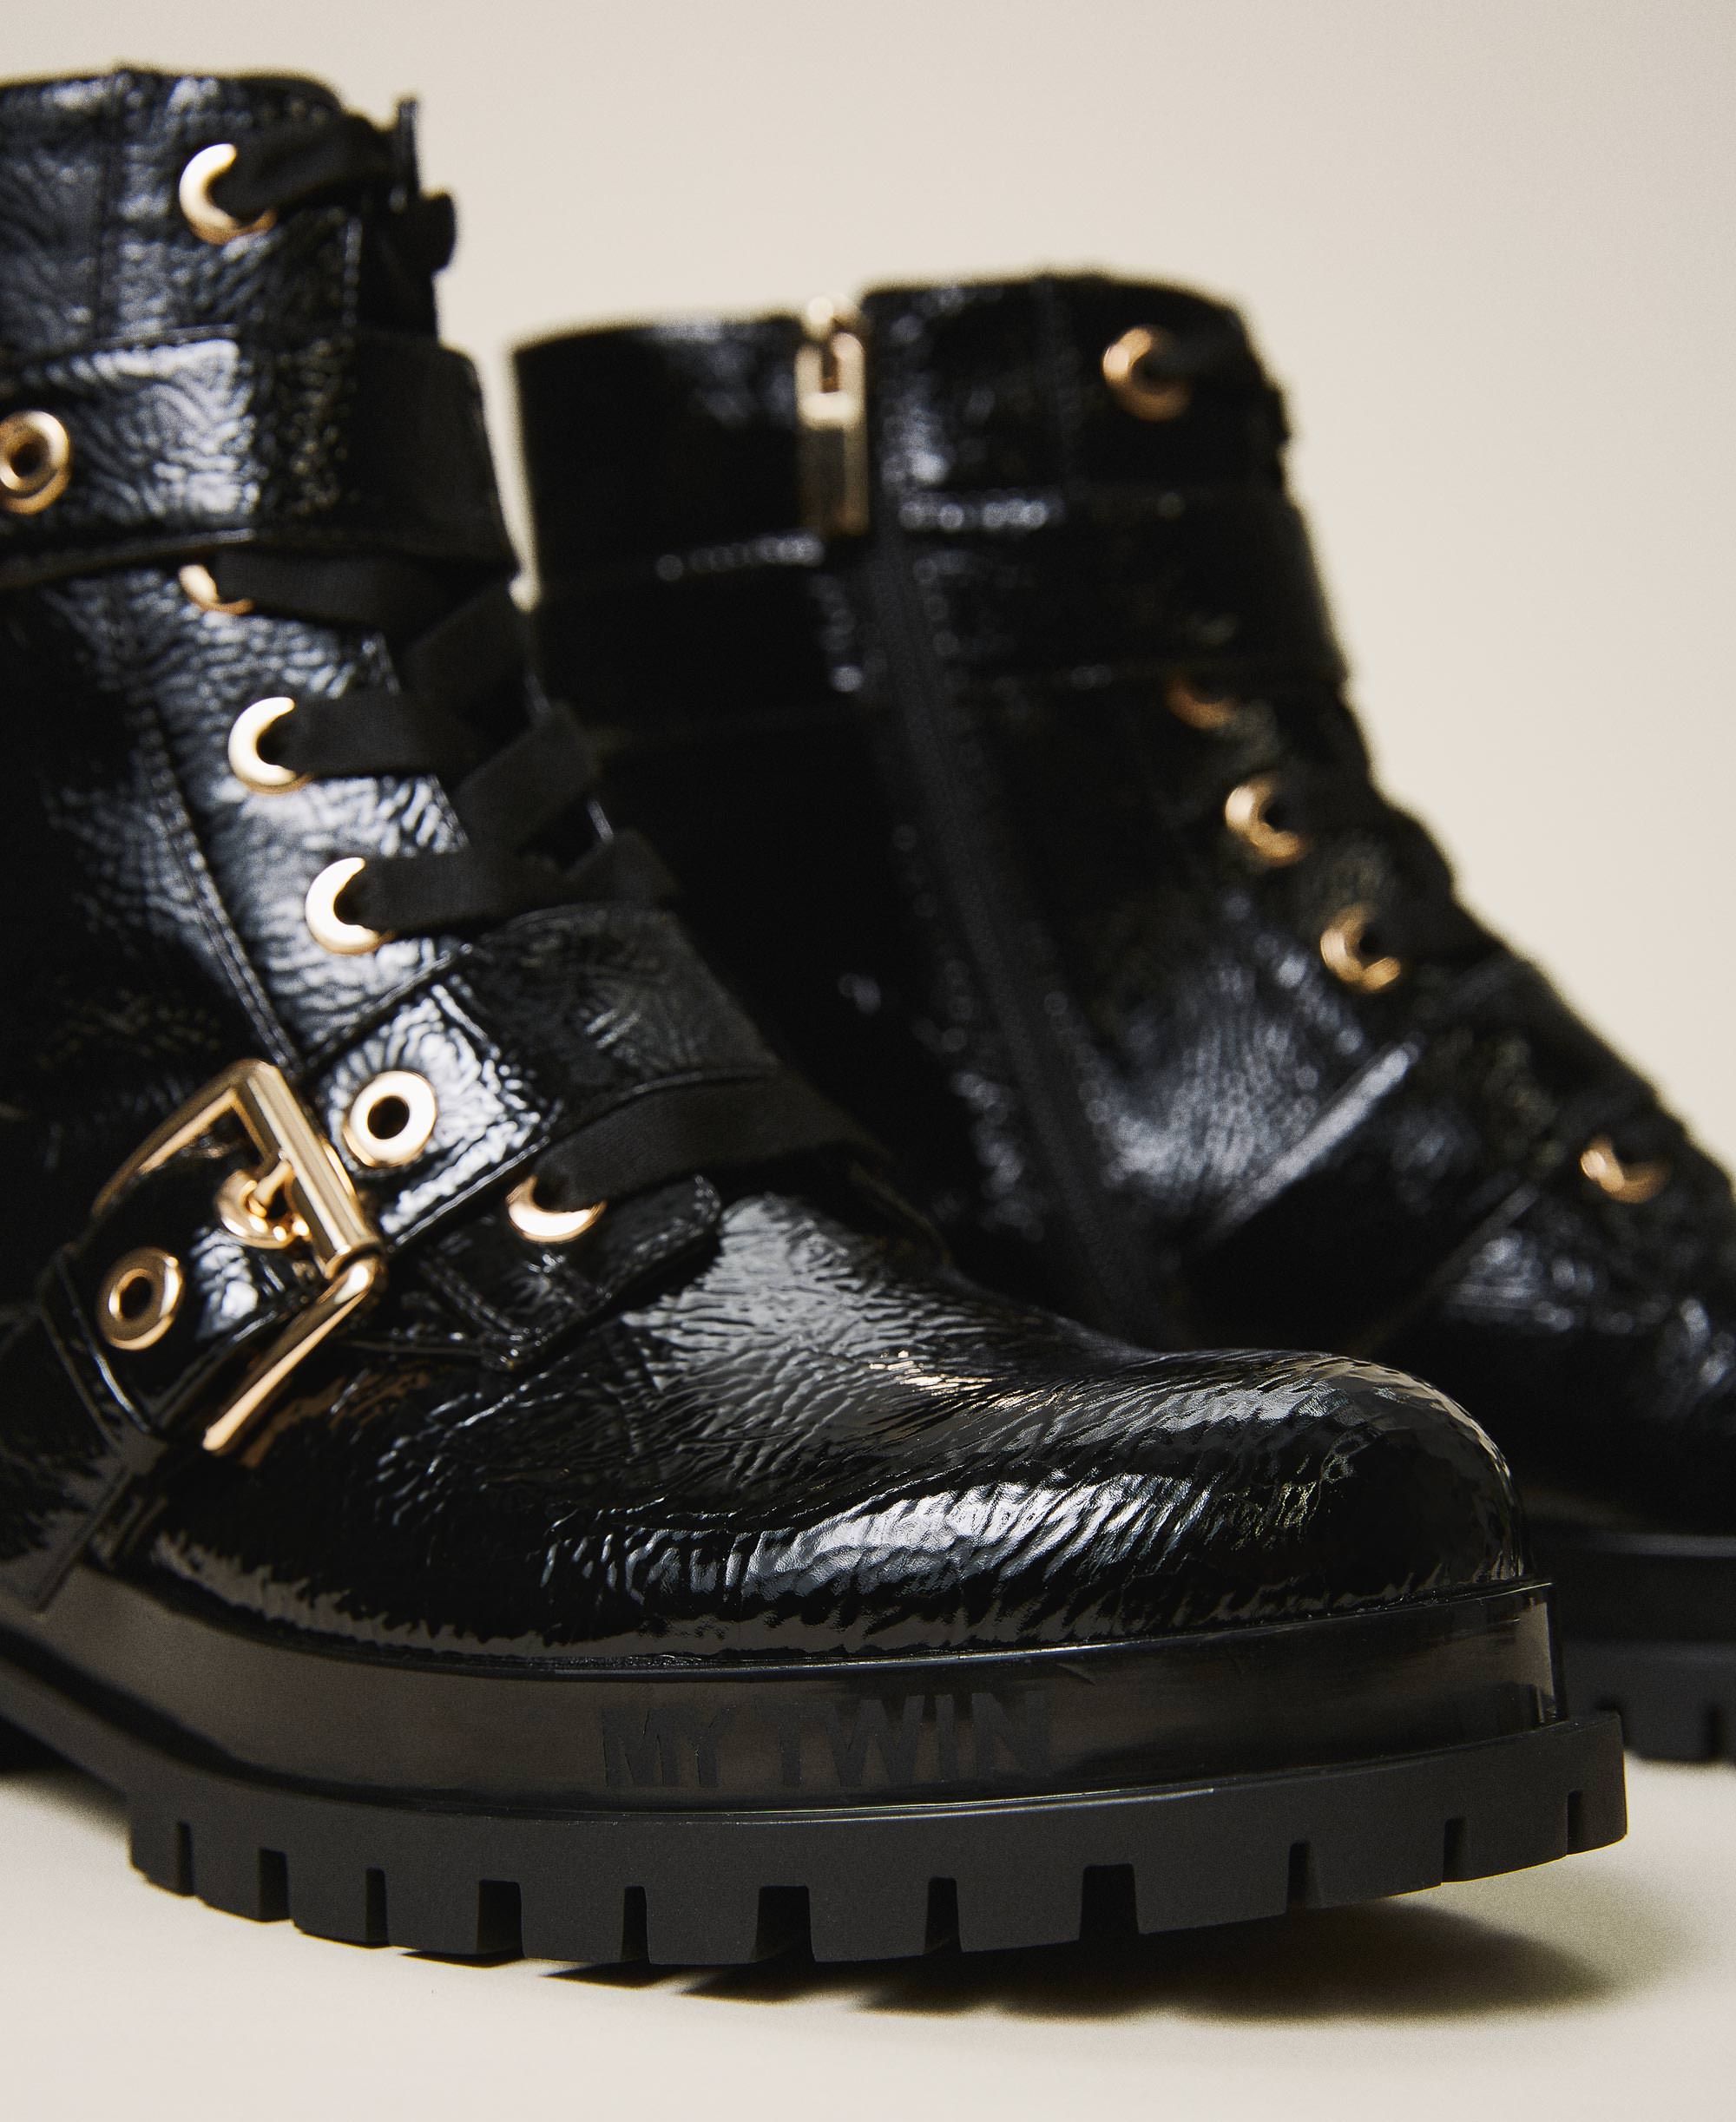 patent leather biker boots